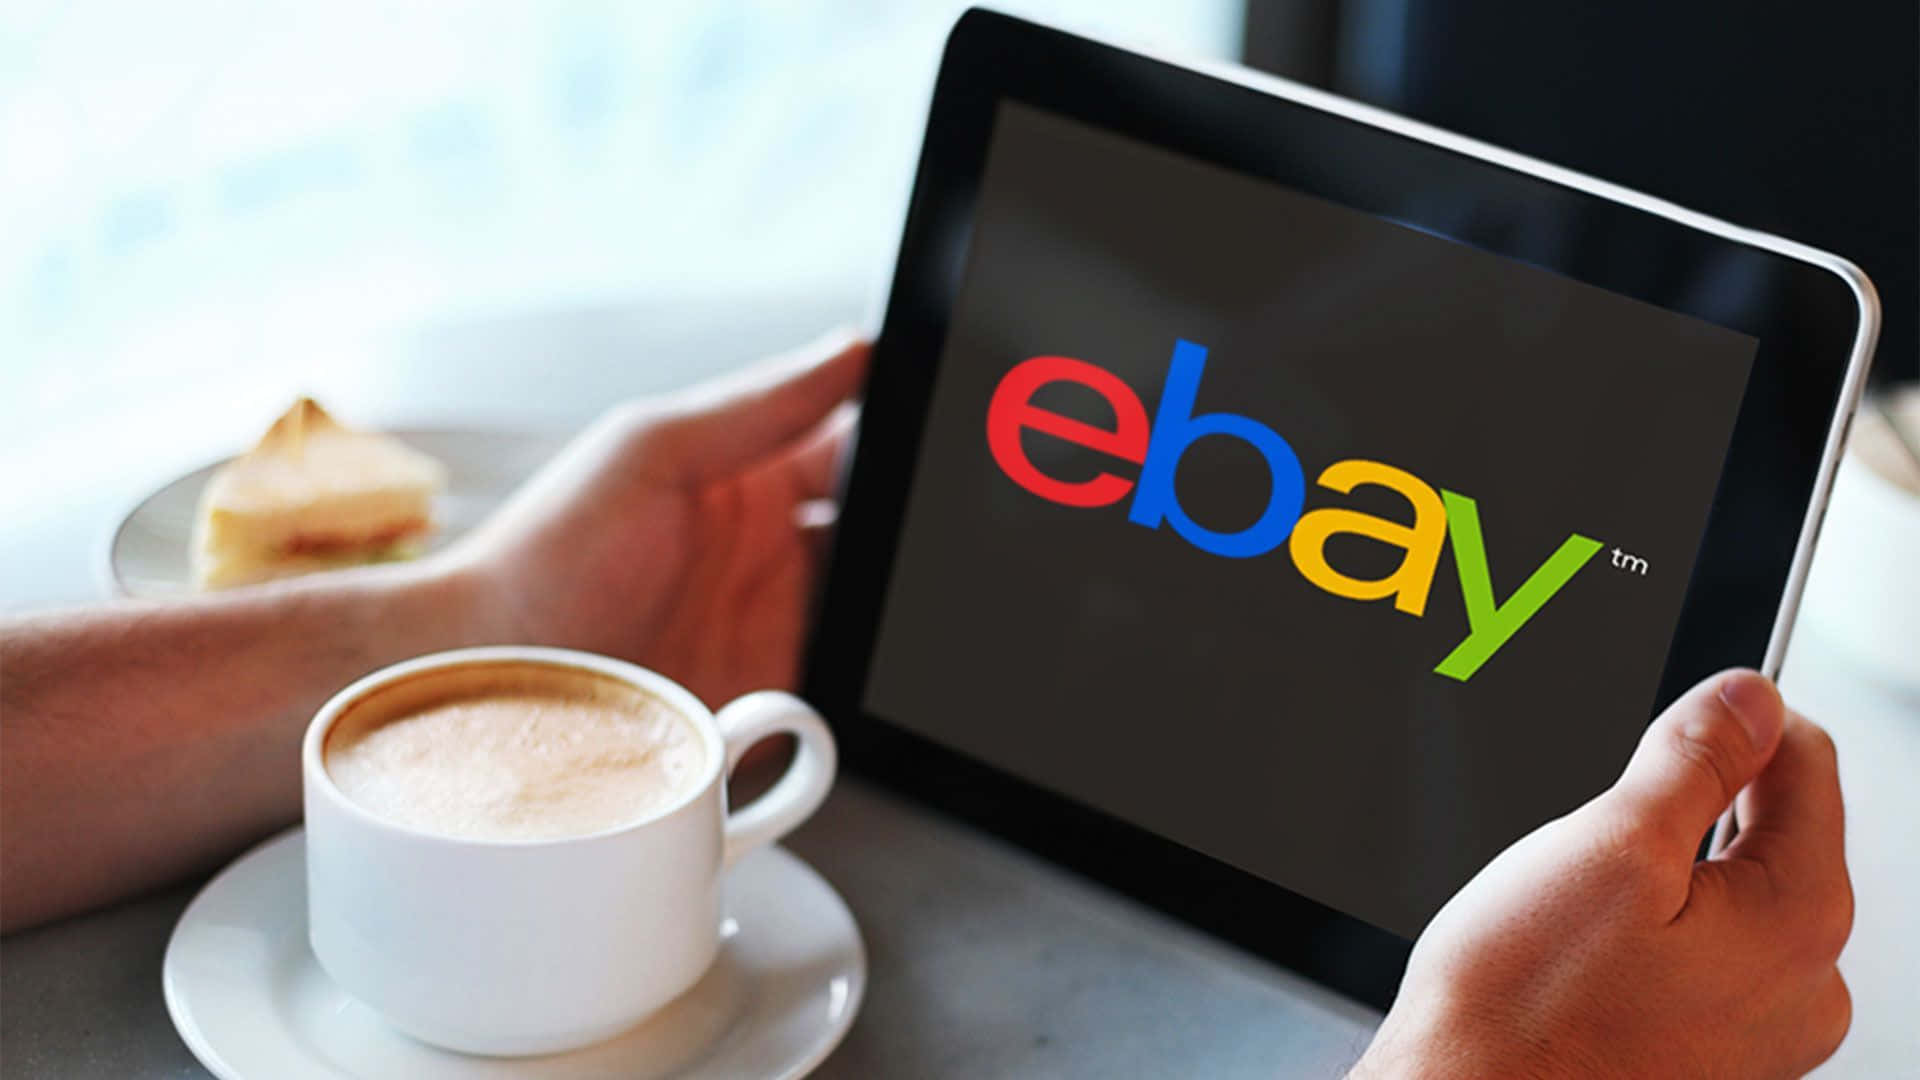 Get the best deals for all your needs with Ebay